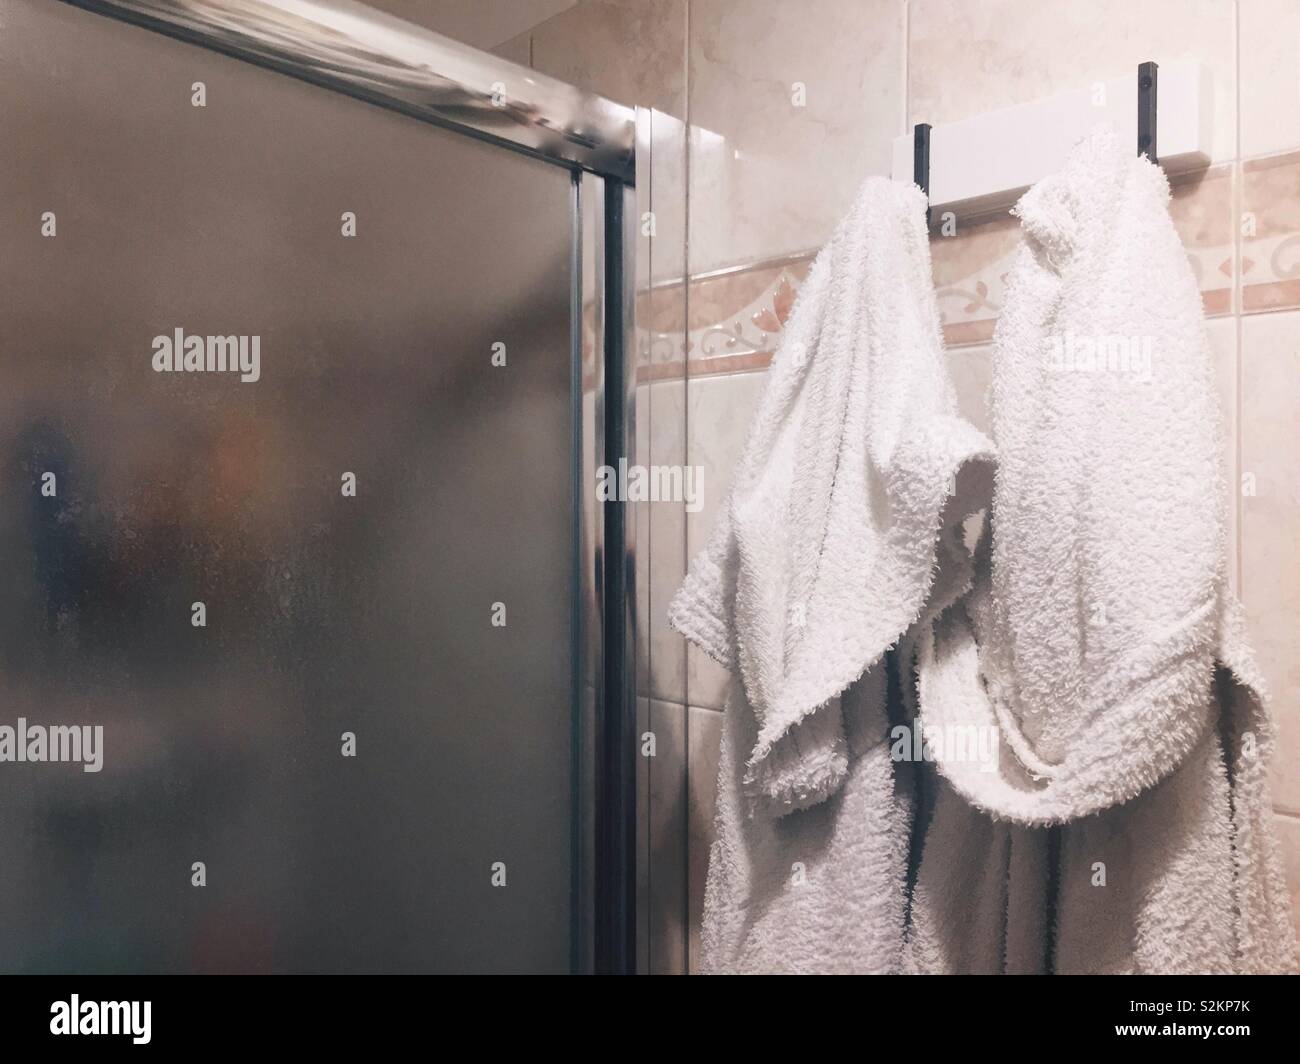 A couple of white bathrobes hanging on the wall near the glass door of a shower stall Stock Photo